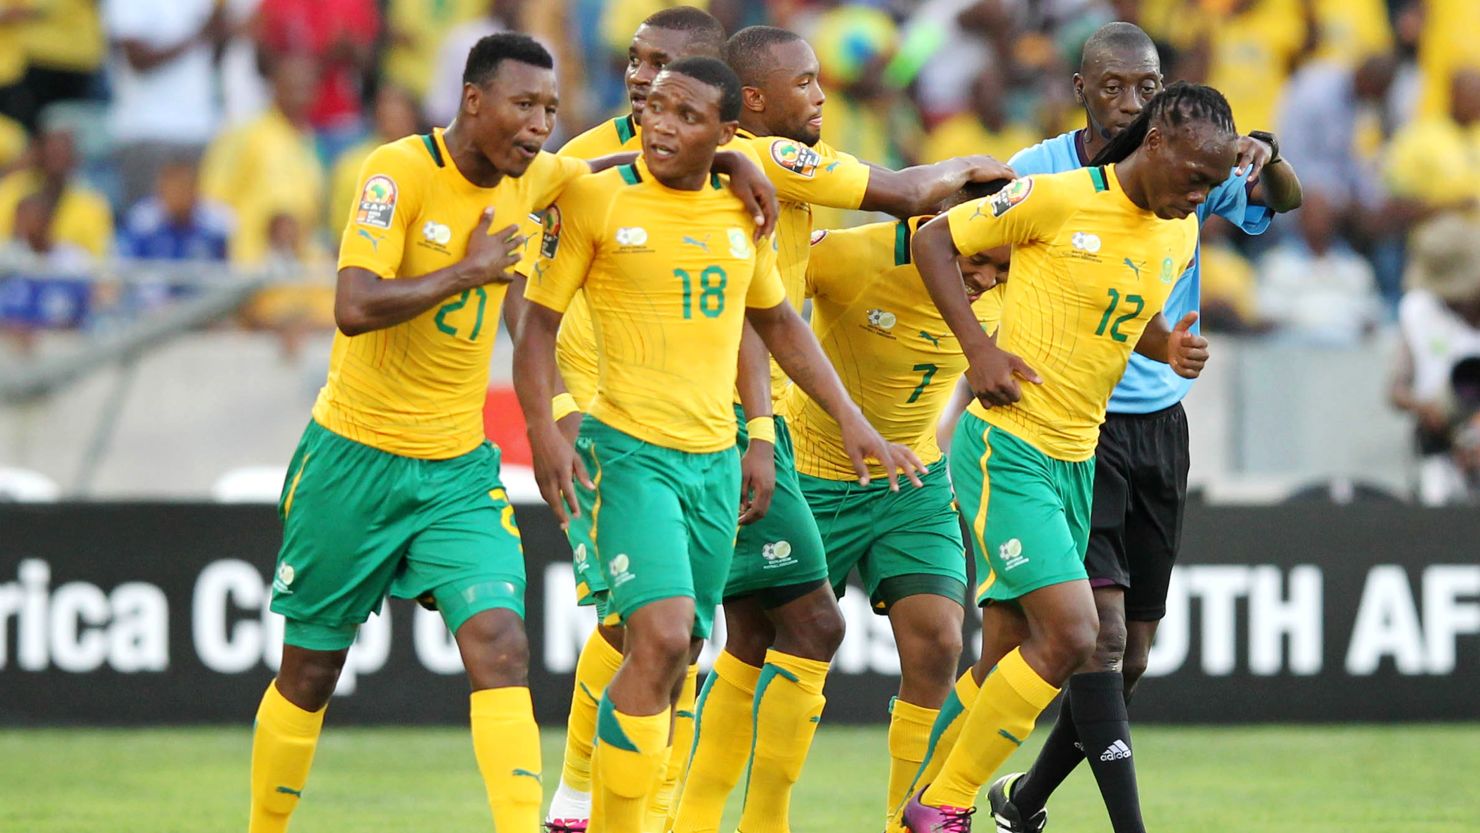 South Africa's players celebrate on their way to a 2-0 win over Angola in Durban Wednesday.